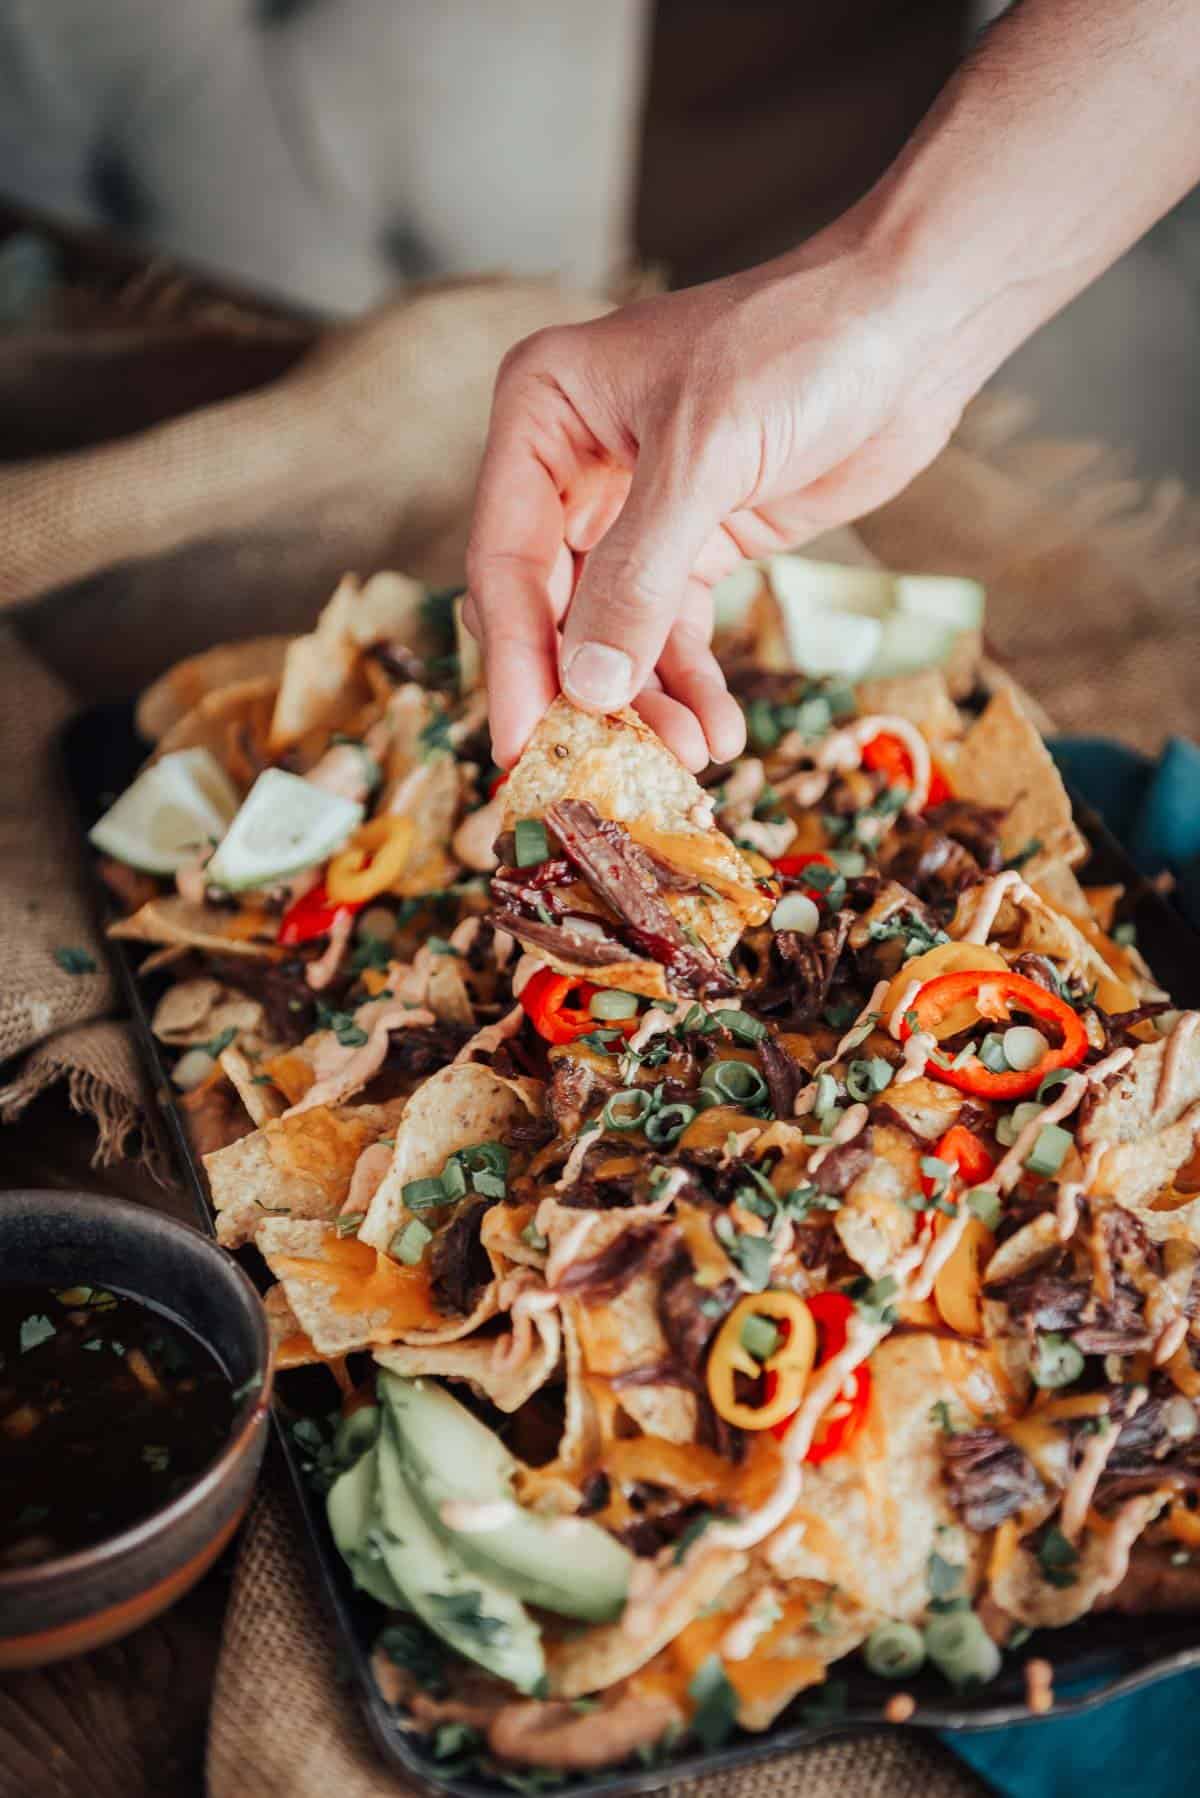 A person grabbing nachos from a tray.